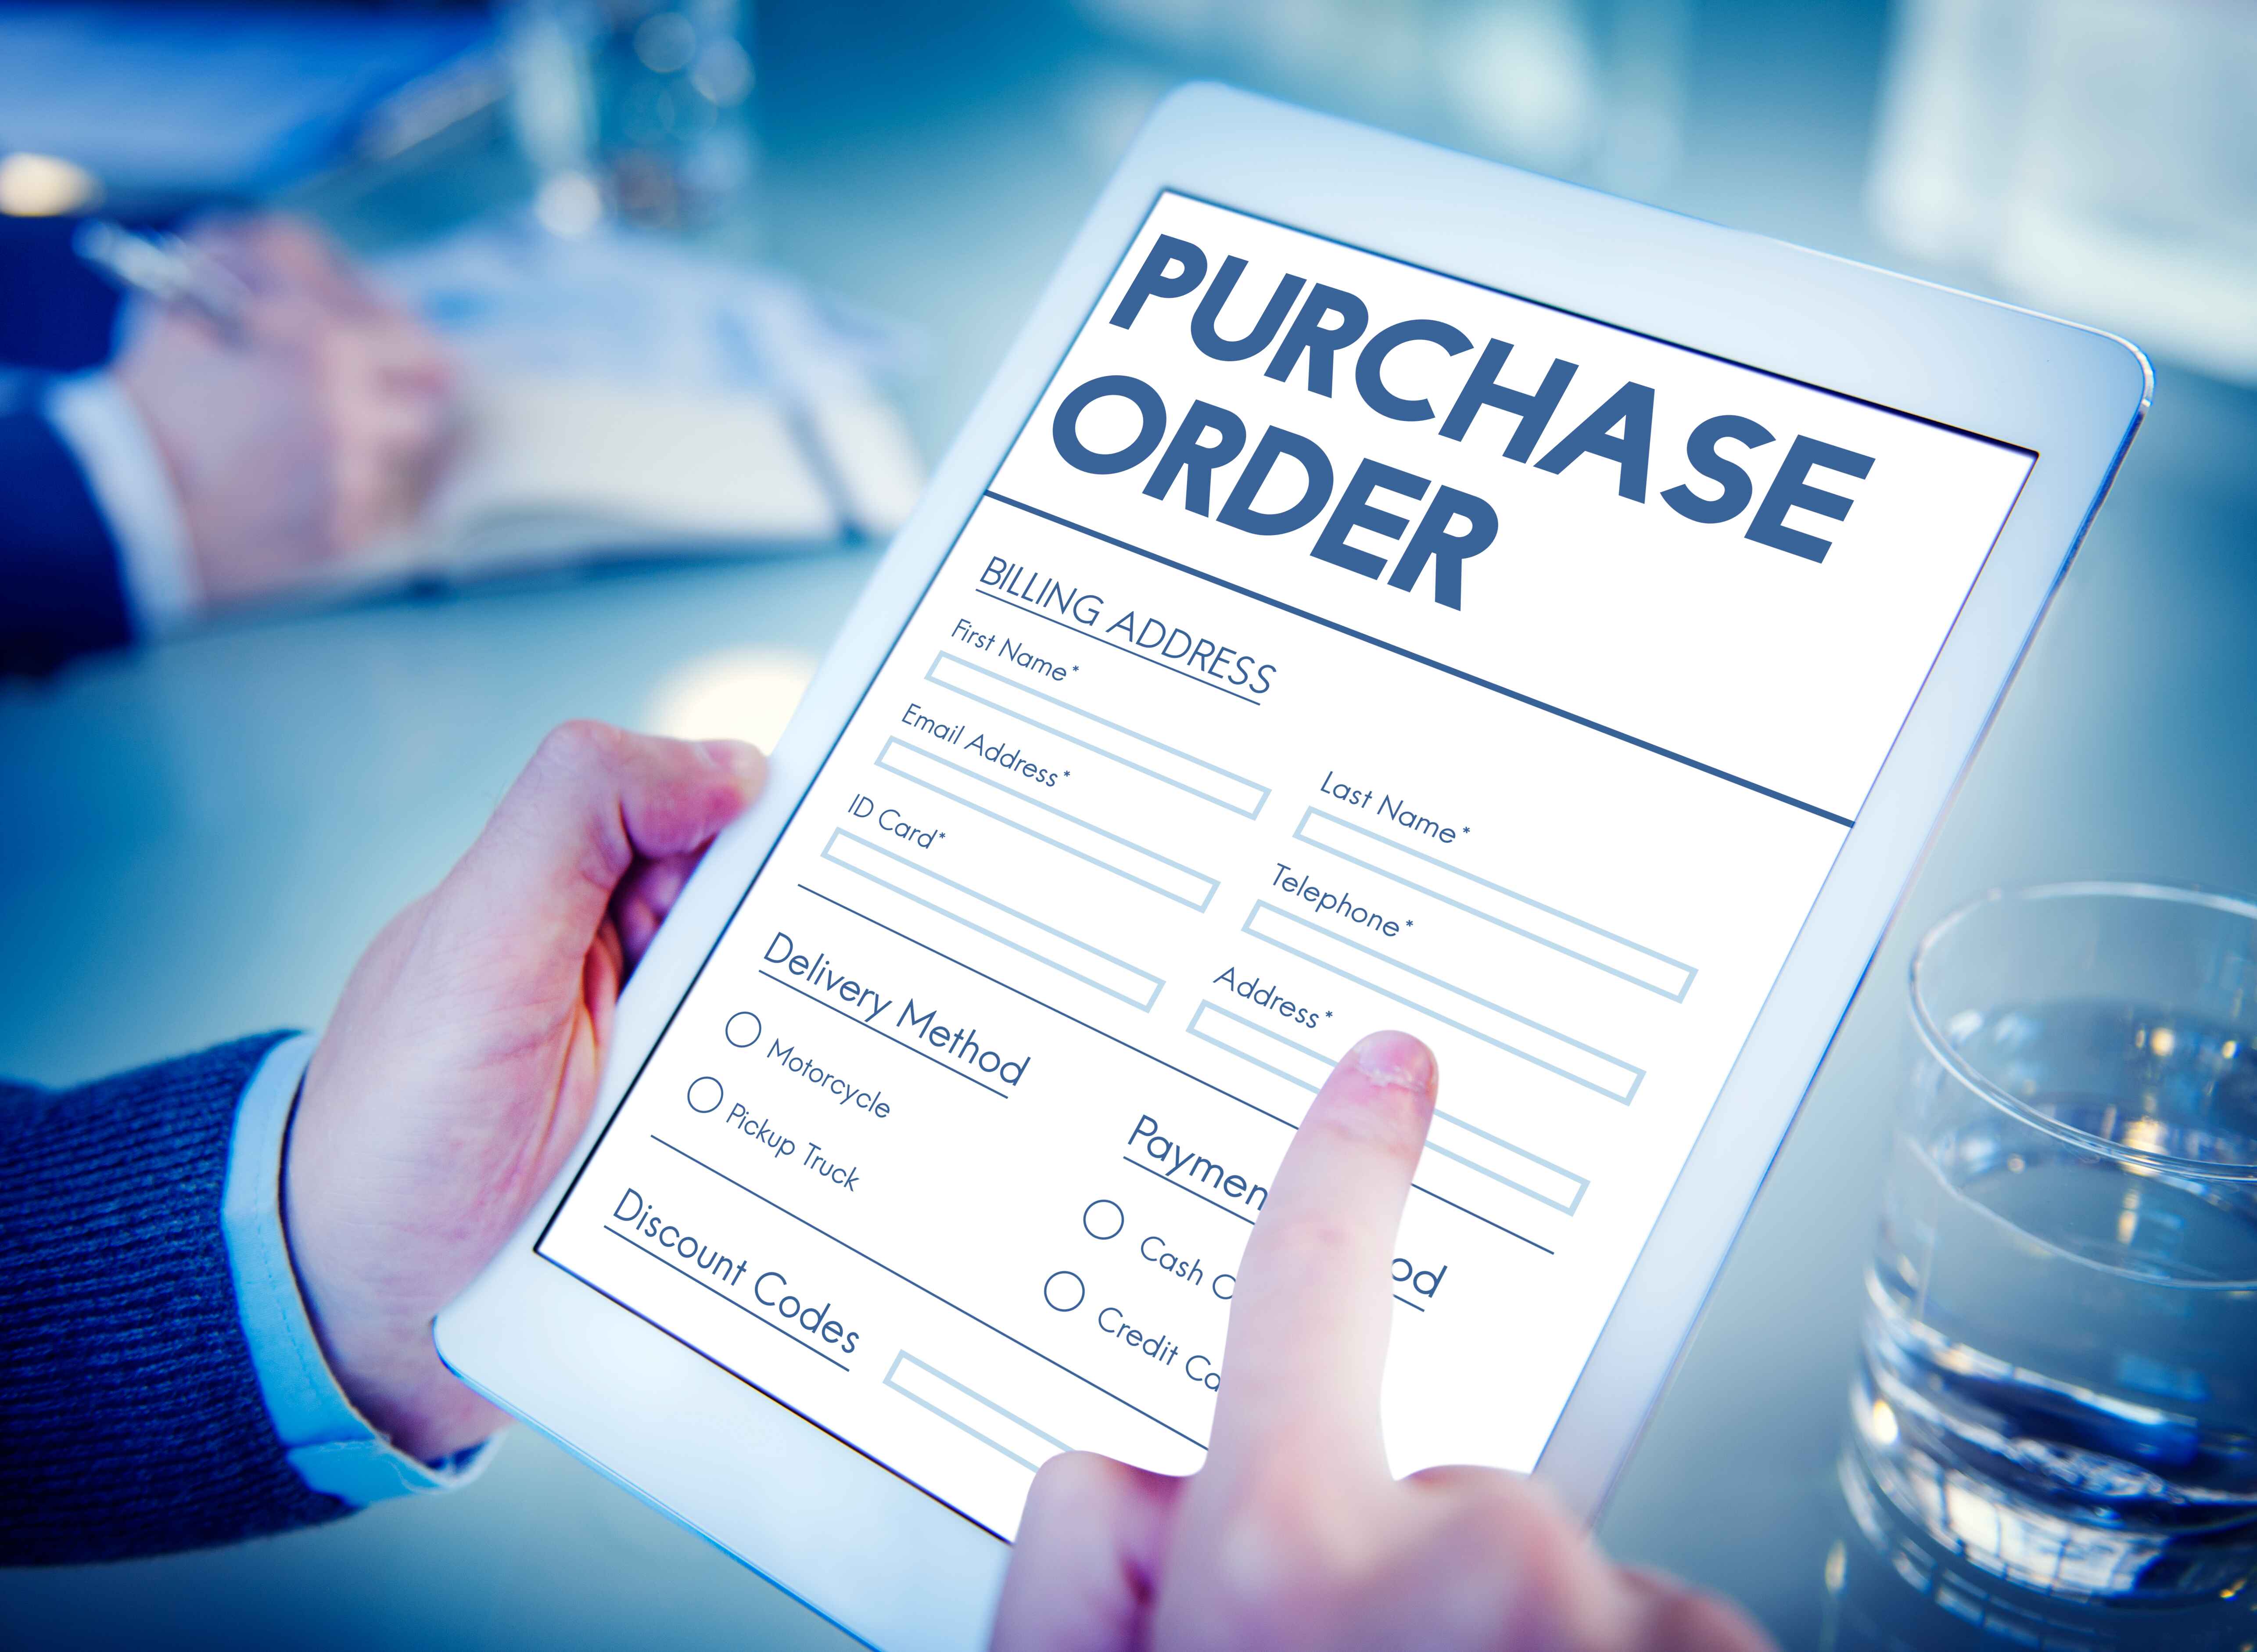 Modern approach to purchase orders